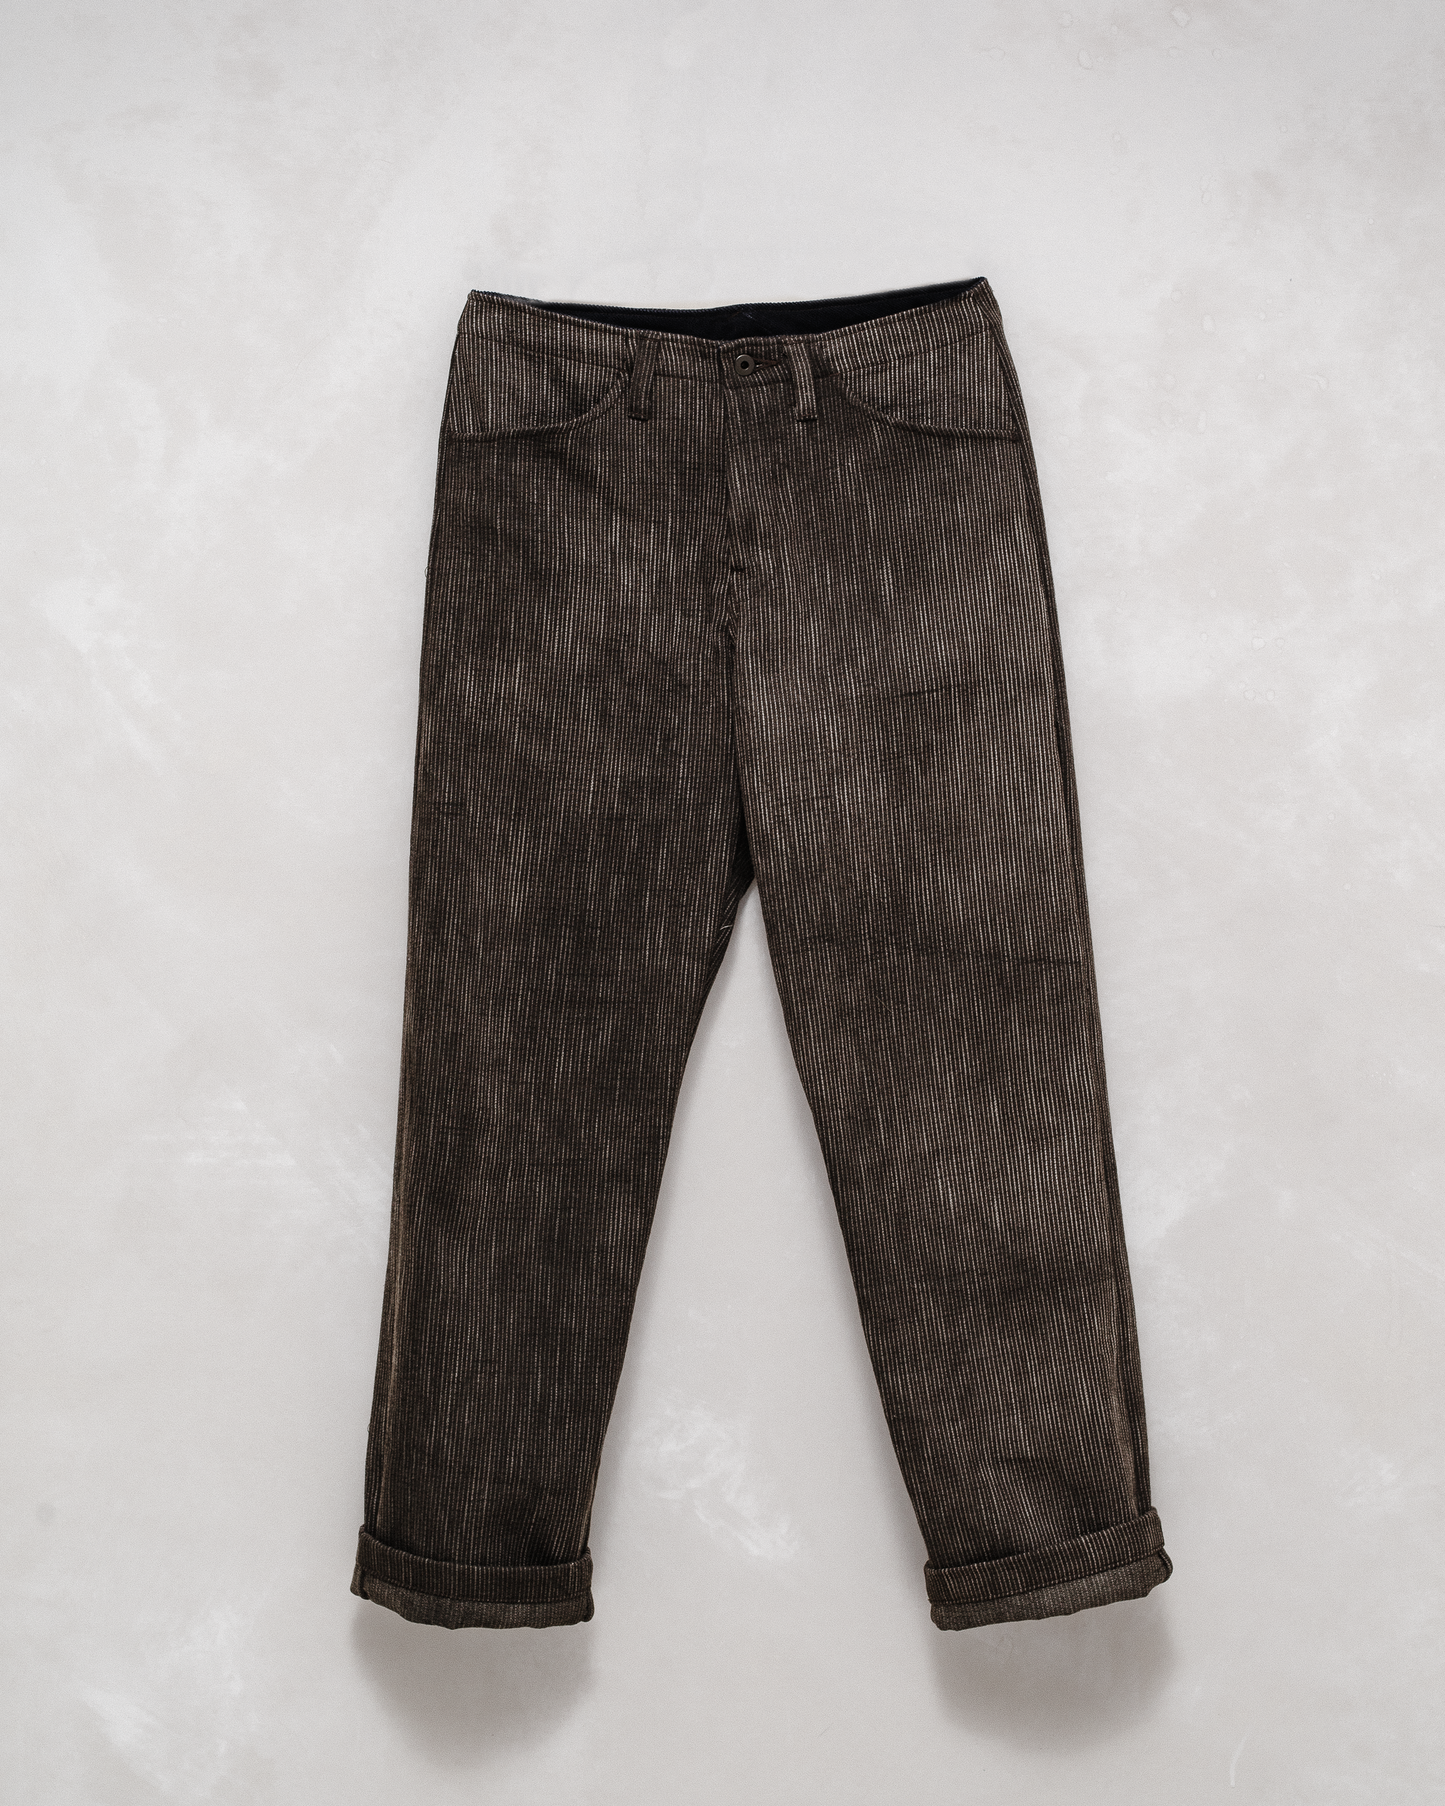 Four Pocket Pant - Sumi Ink Overdyed Hickory